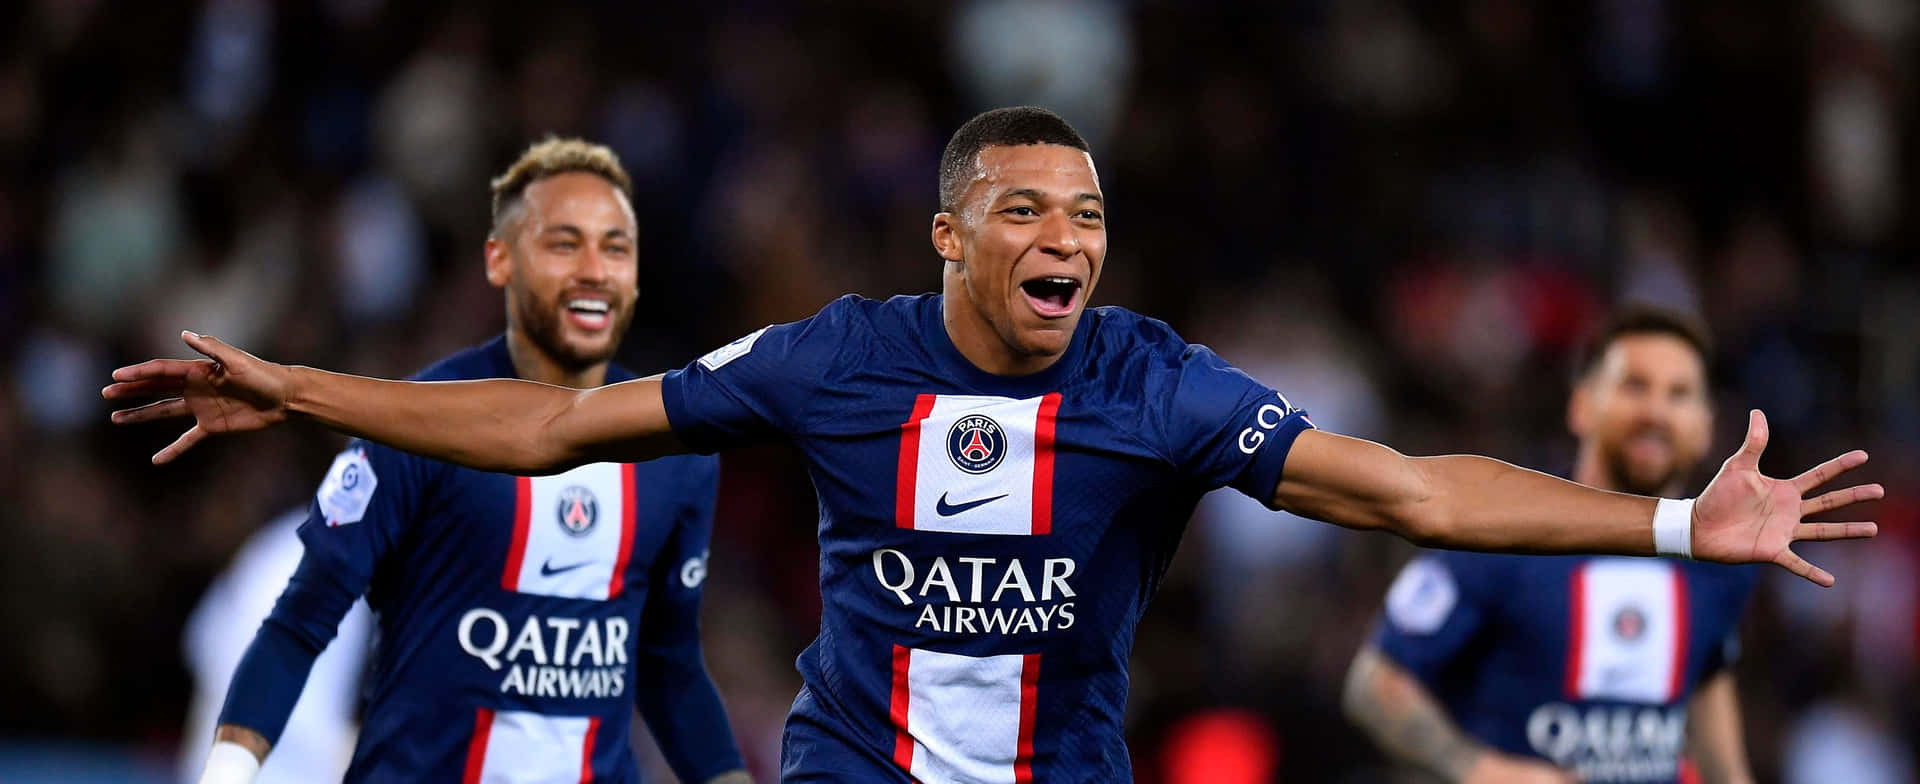 Soccer Player Kylian Mbappe Open Arms Picture